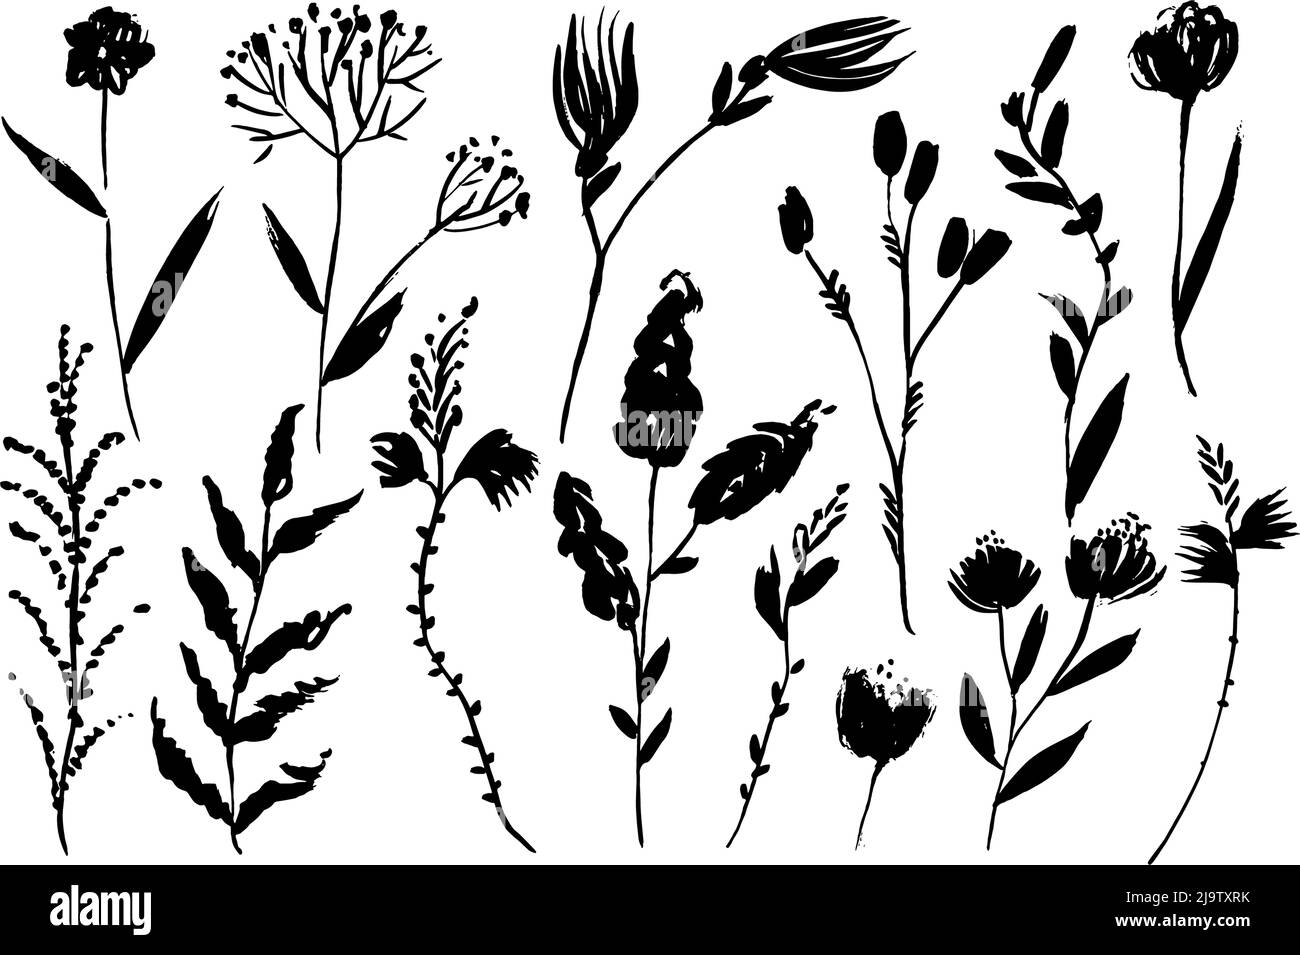 Hand drawn black wild flowers drawings collection. Stock Vector